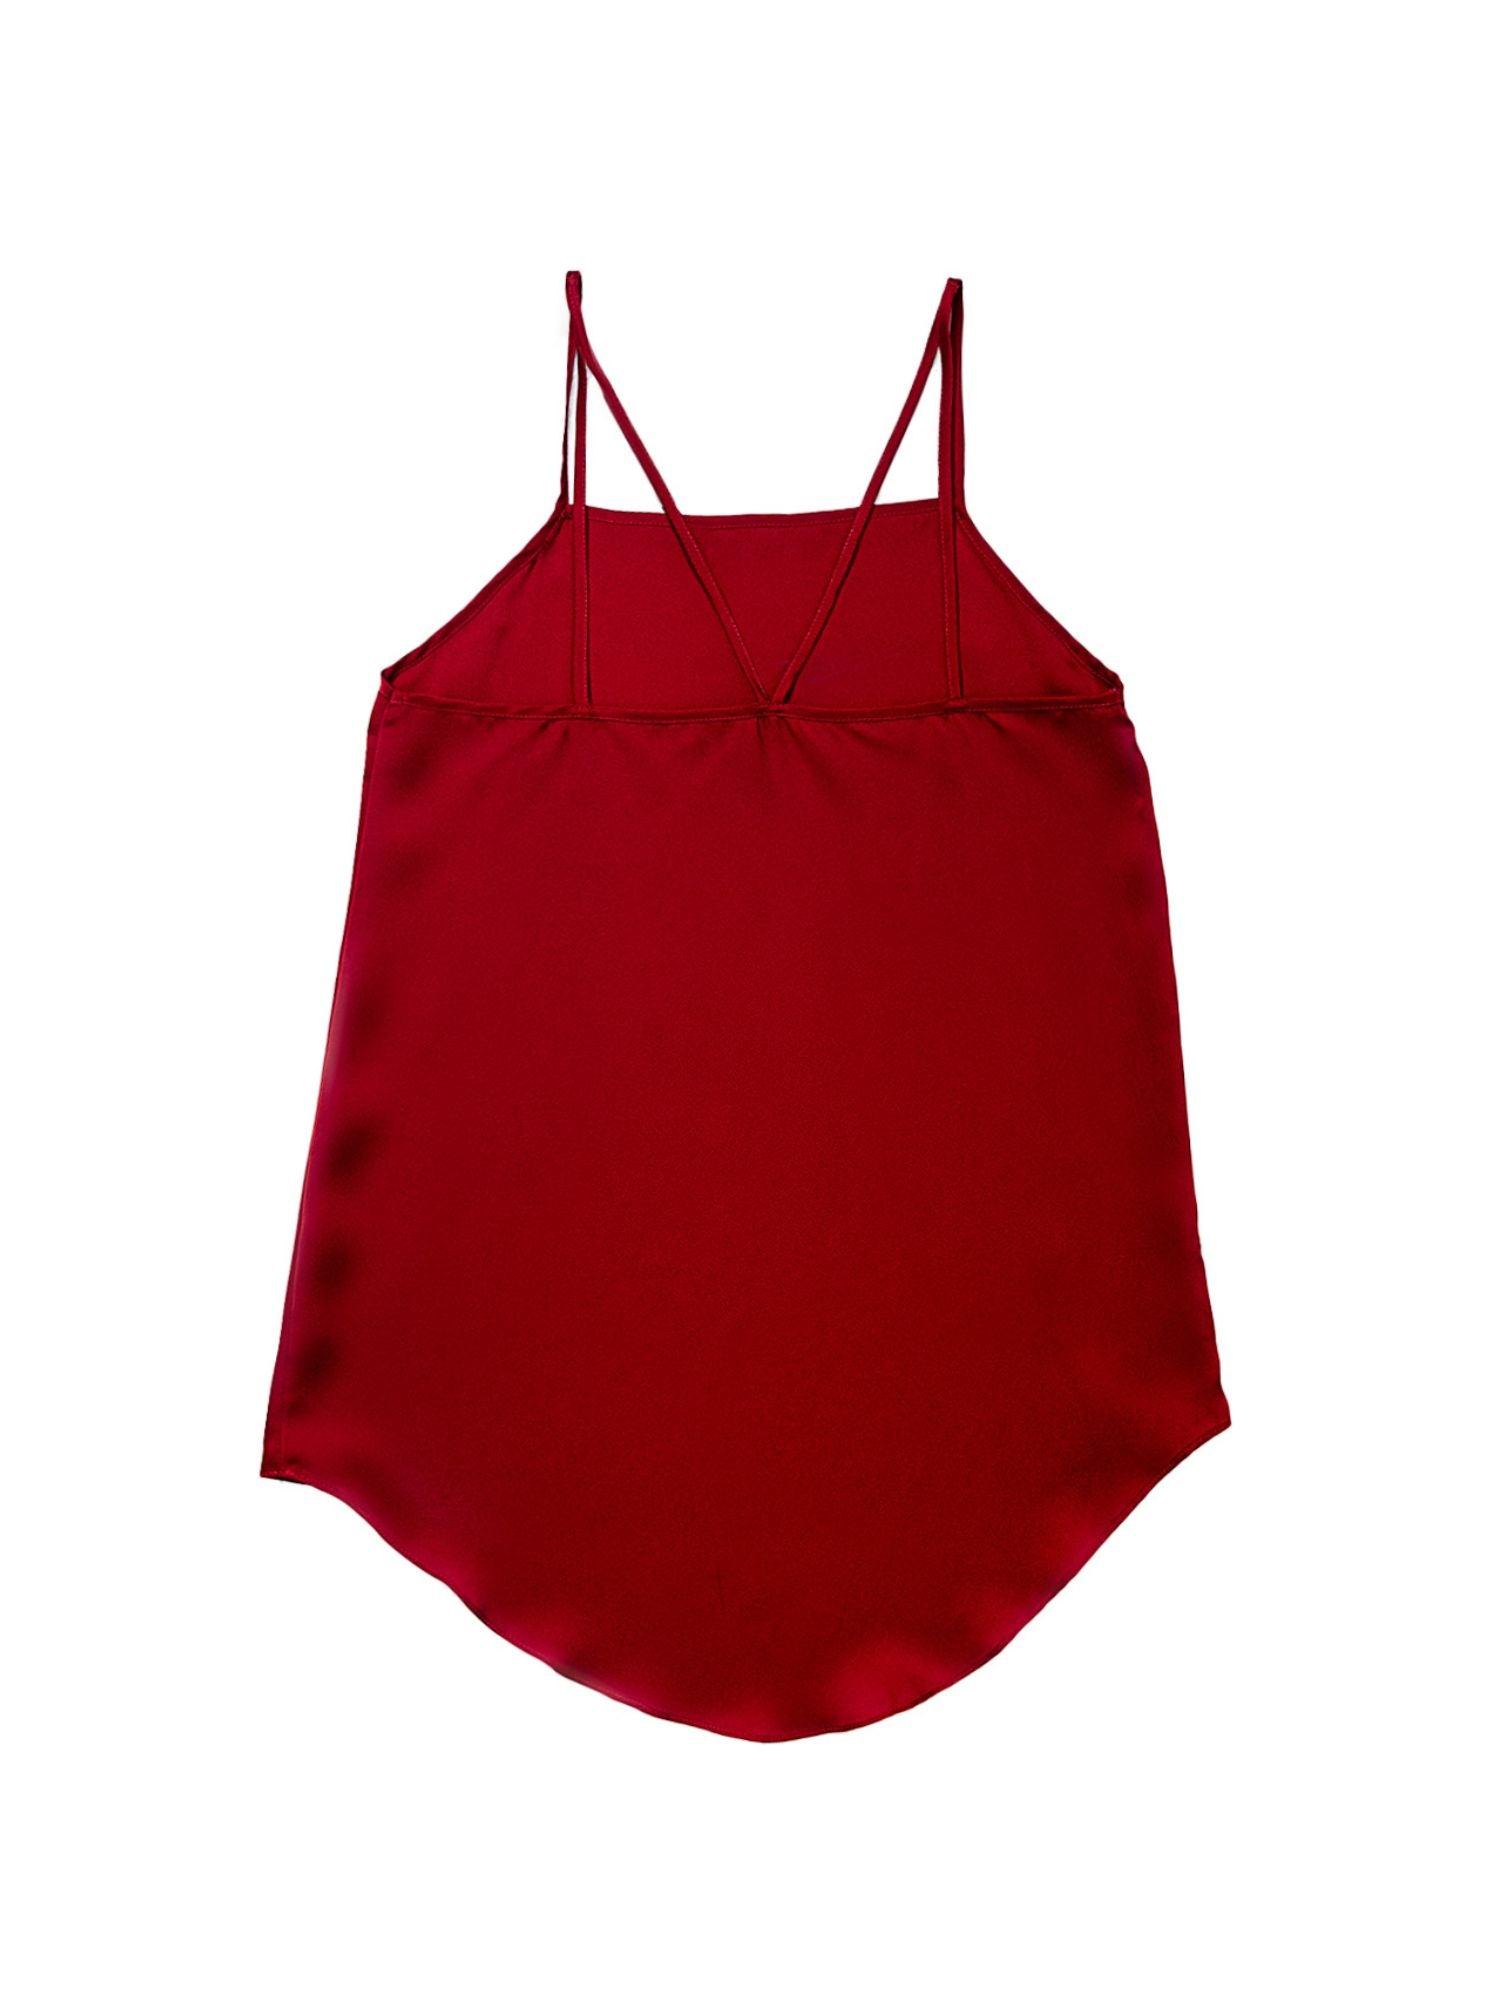 Dionne Camisole